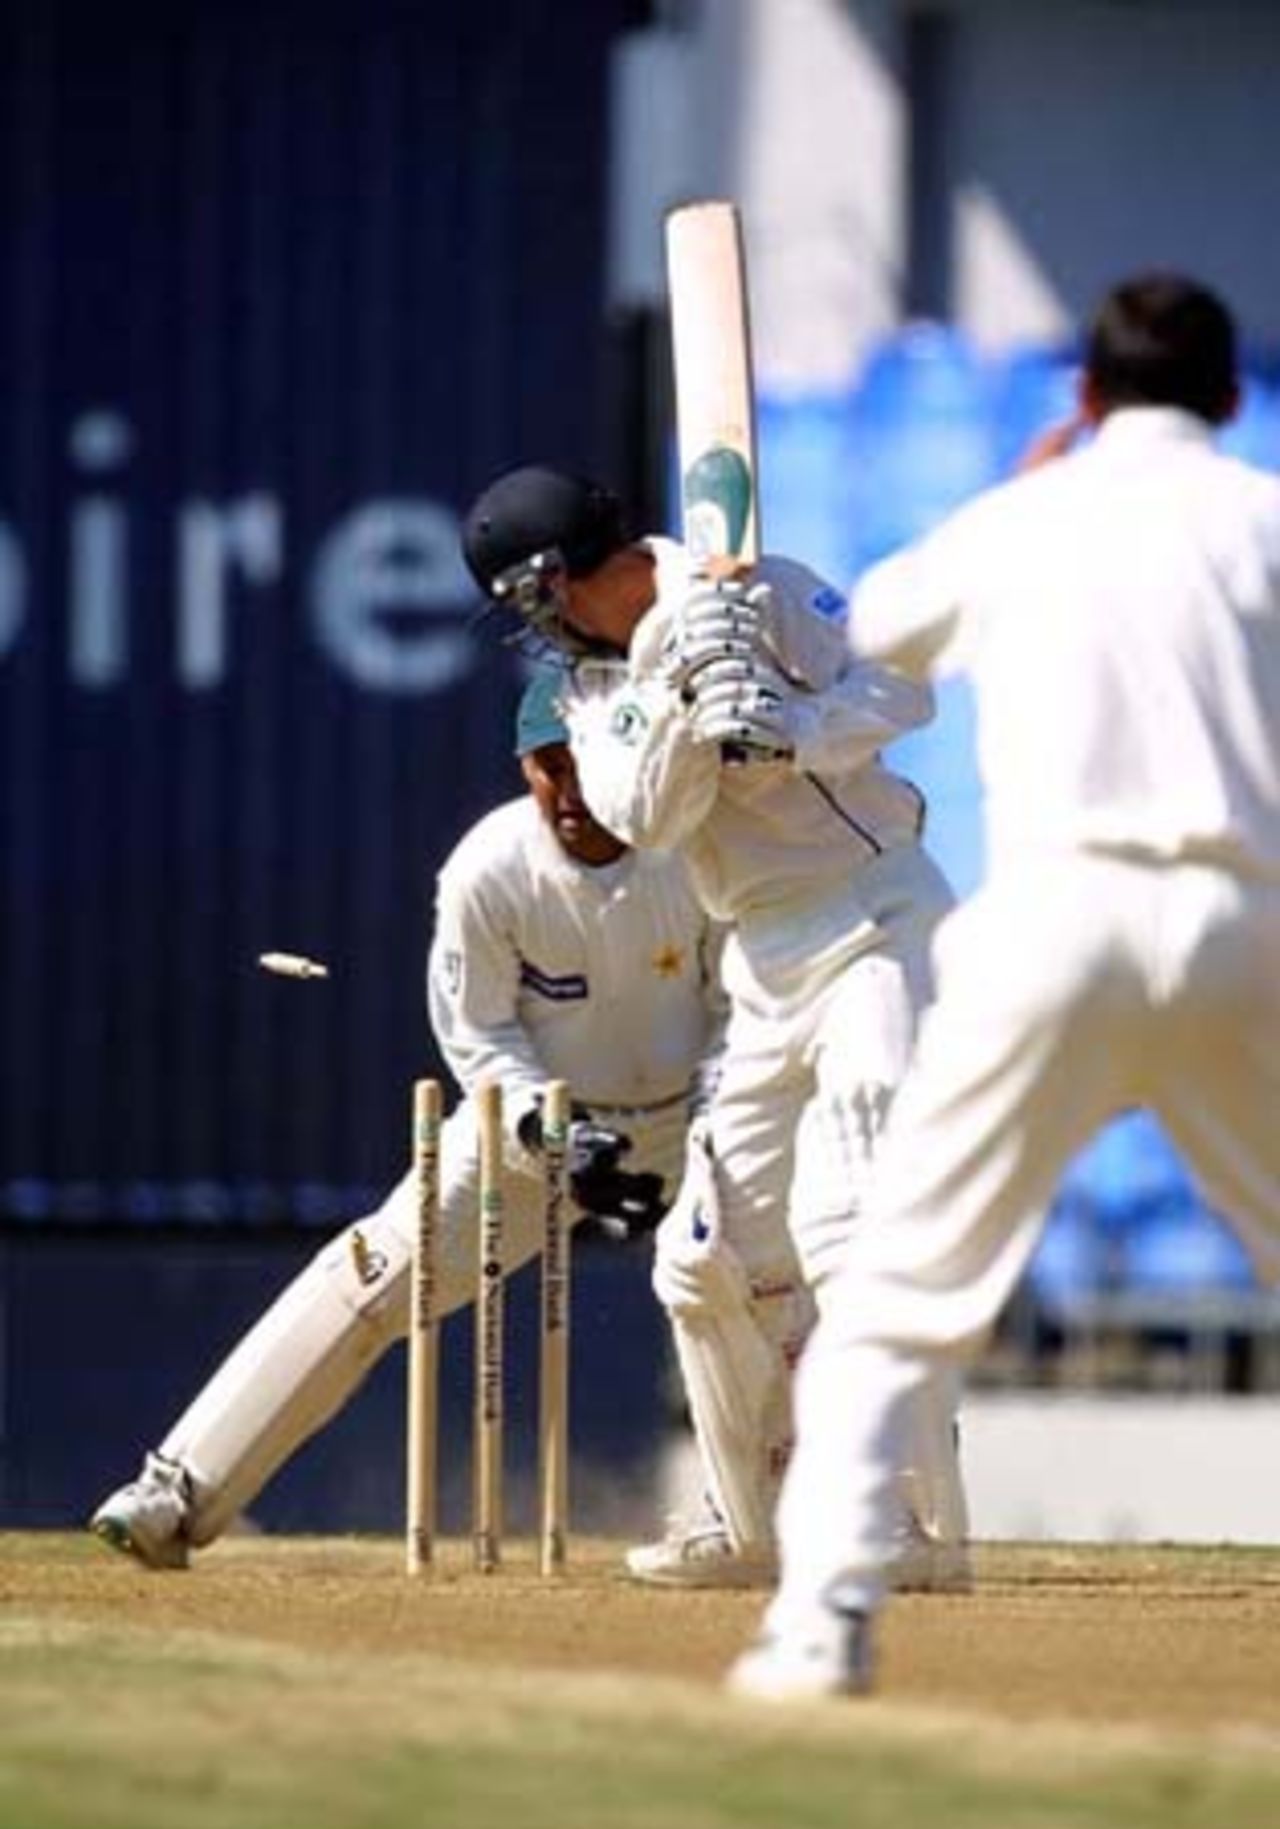 New Zealand batsman Nathan Astle looks back to see the stumps rattled as he is bowled by Pakistan off spinner Saqlain Mushtaq for one. Wicket-keeper Moin Khan looks on. 1st Test: New Zealand v Pakistan at Eden Park, Auckland, 8-12 March 2001 (12 March 2001).